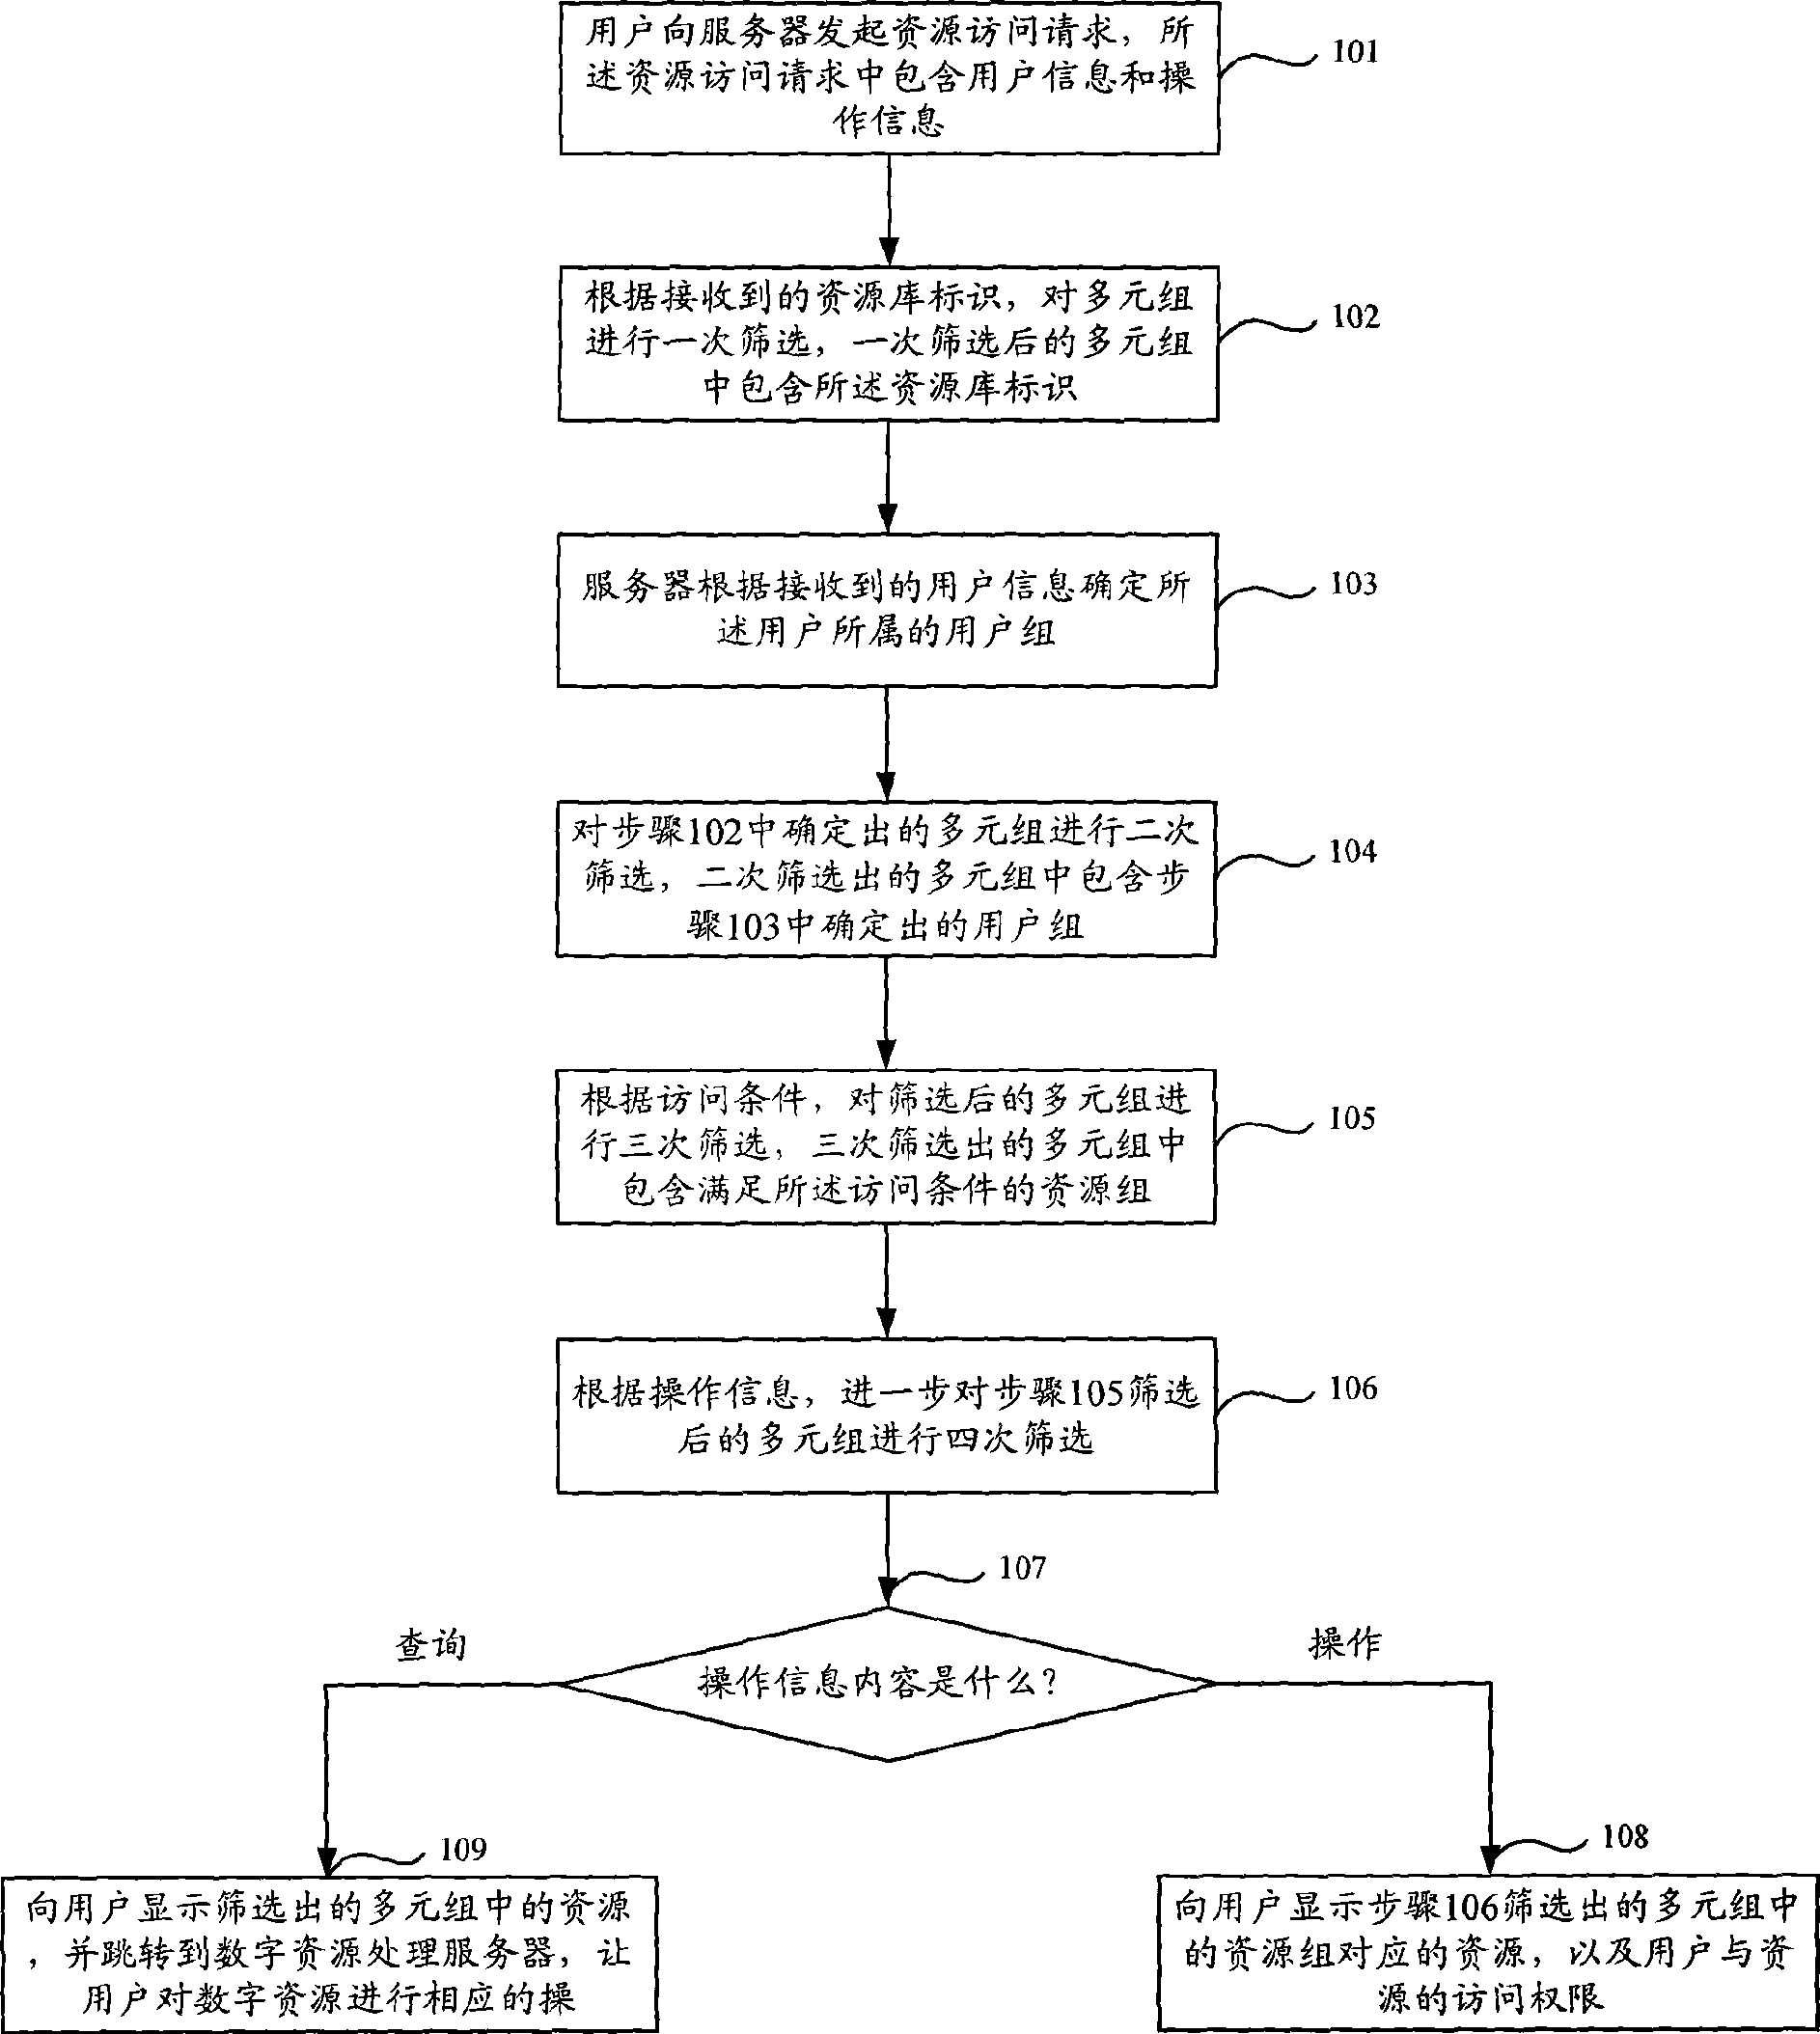 Method and device for accessing digital resources